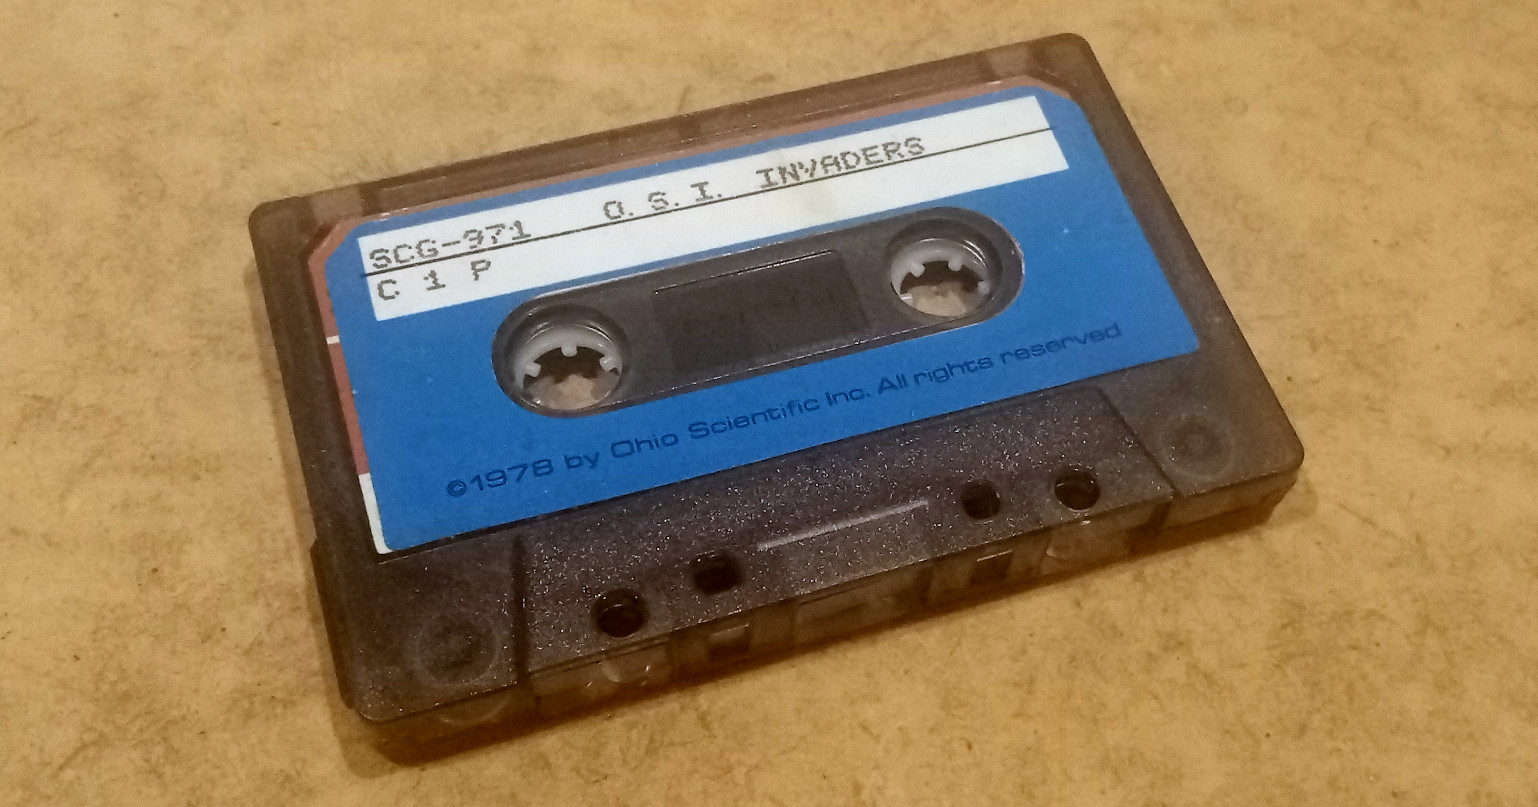 Photograph of the audio original cassette from which the recording was made